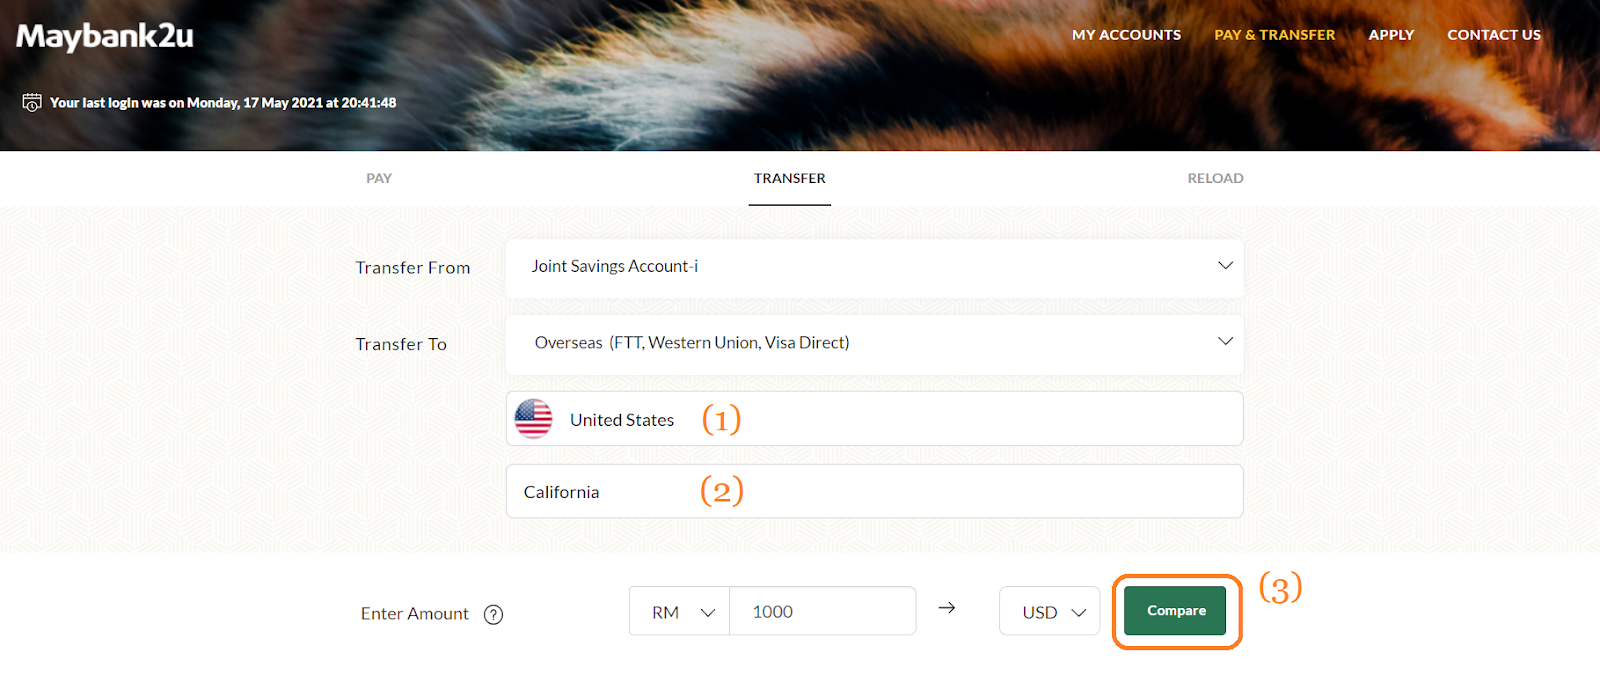 Click on the New Transfer and choose “United States” and “California” for its state